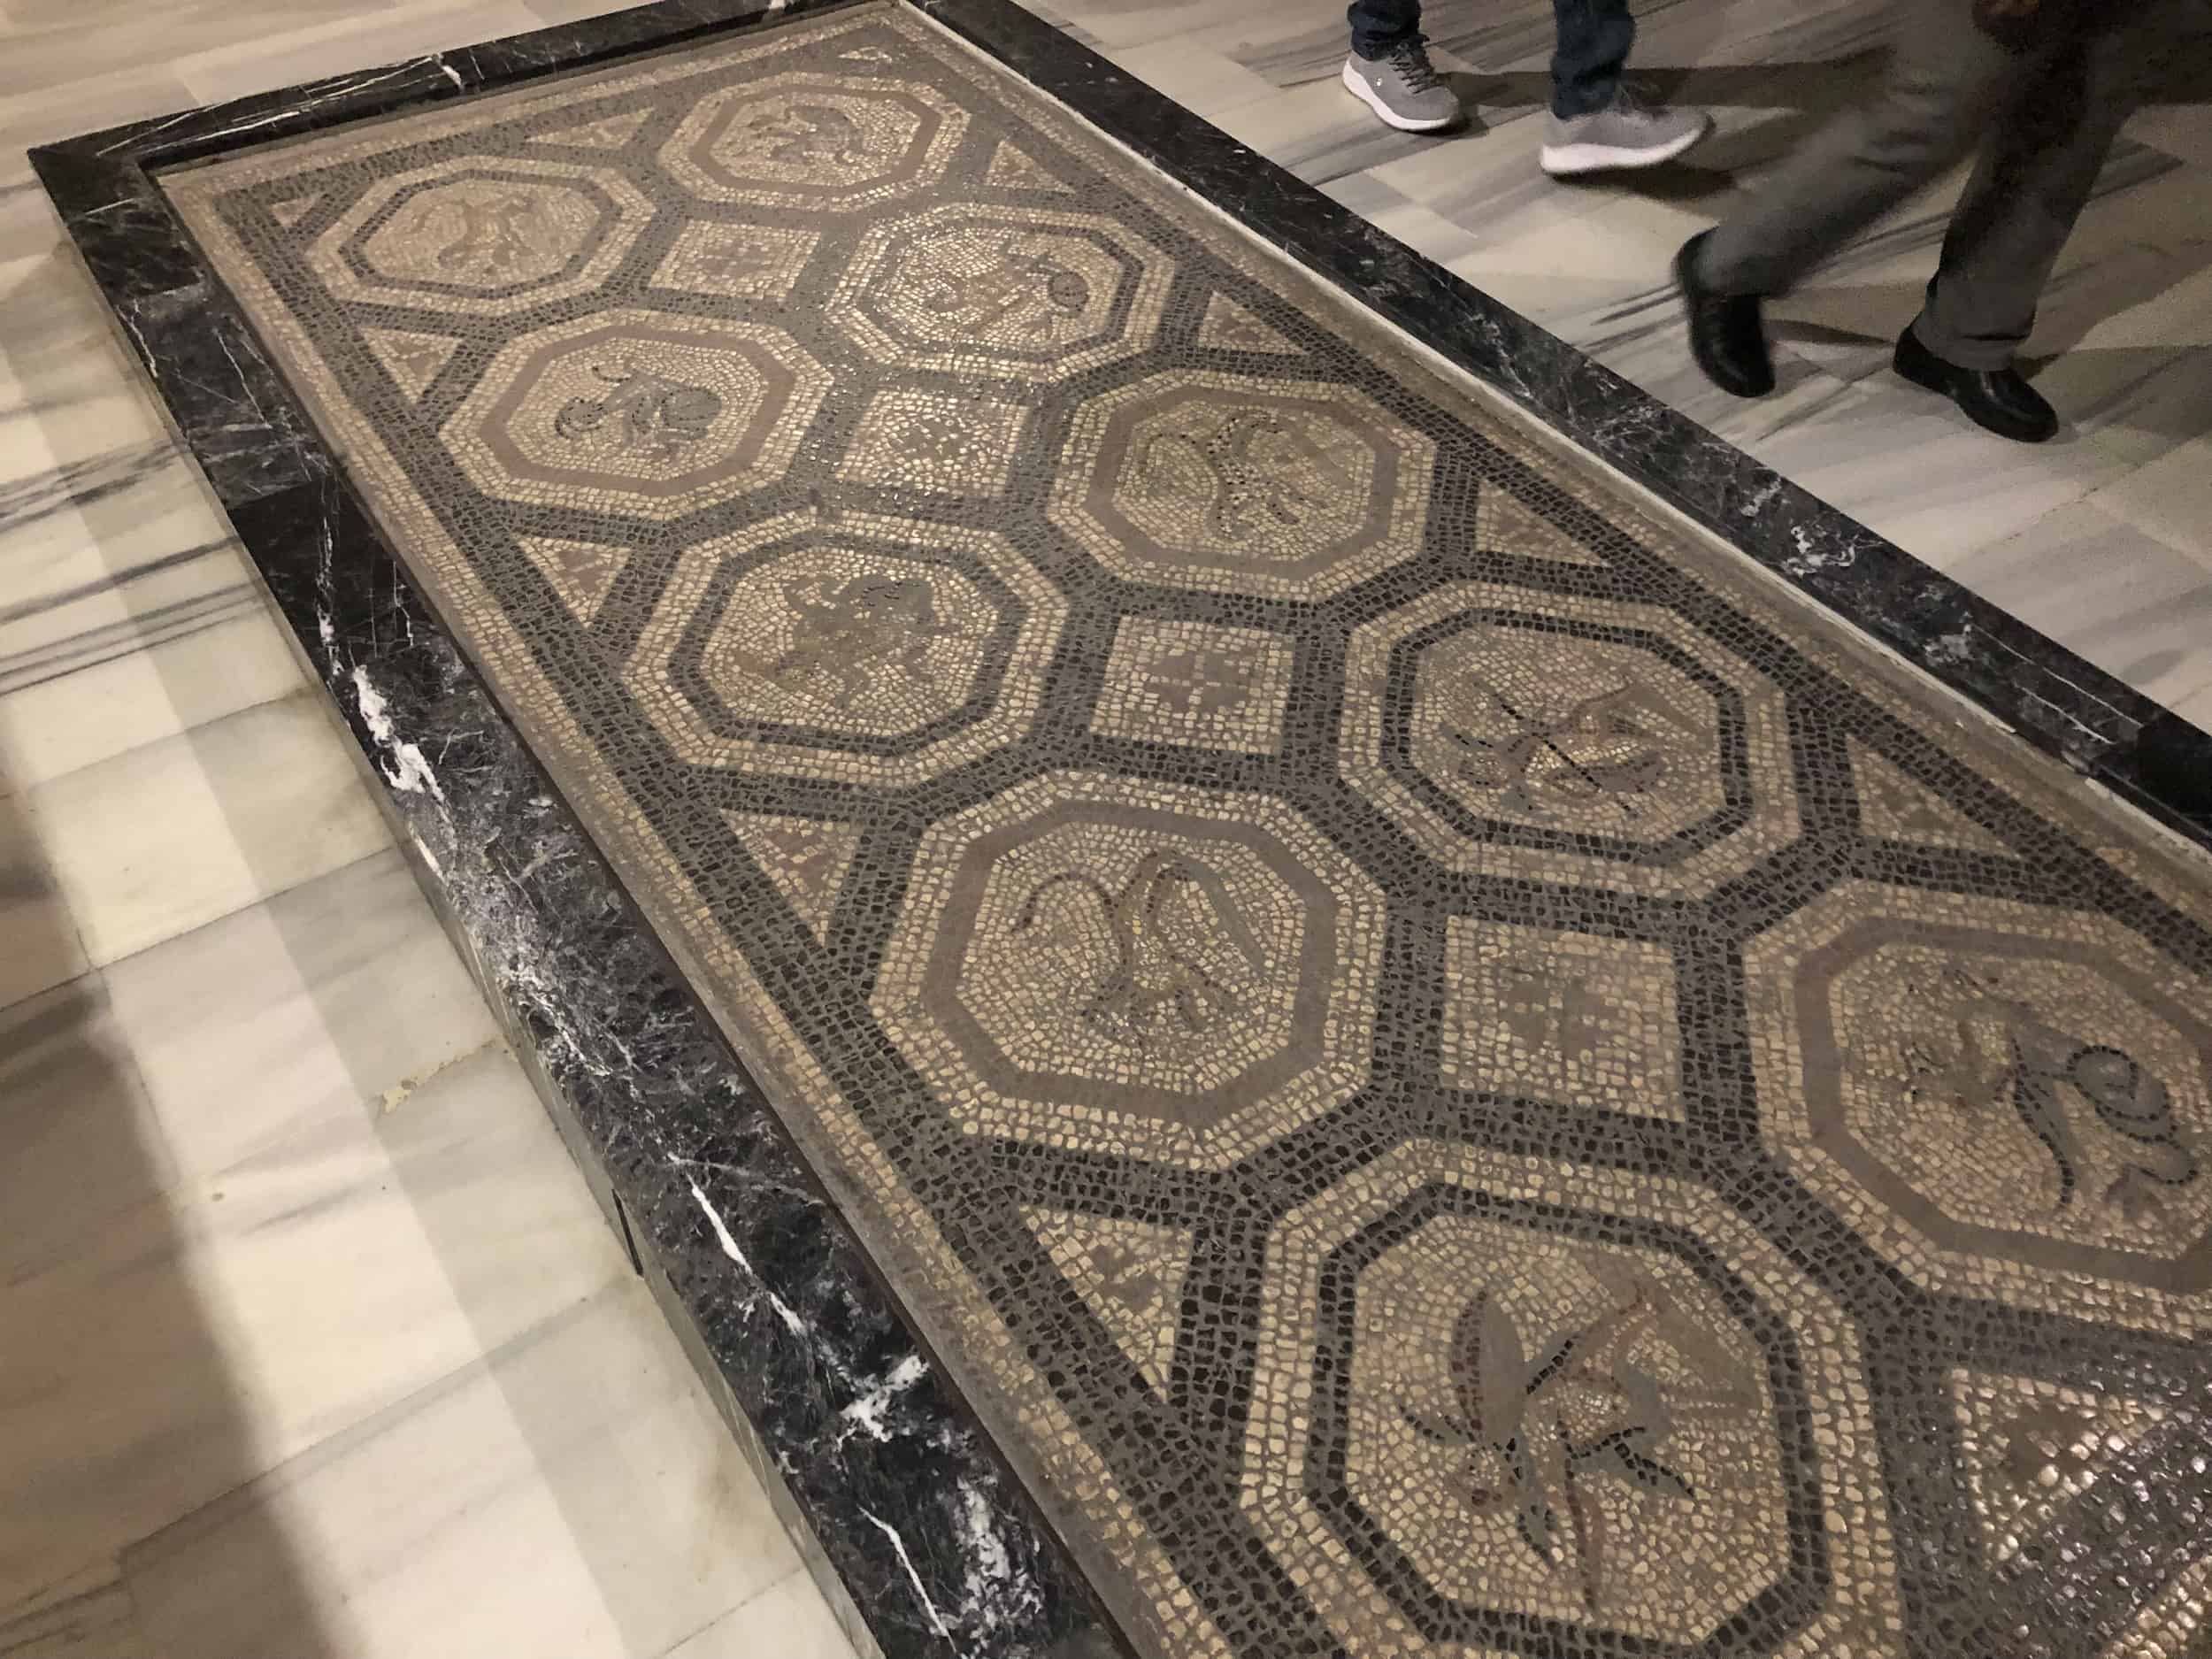 Mosaic floor from Magnesia ad Meandrum (Söke, Aydın) at the Istanbul Archaeology Museum in Istanbul, Turkey